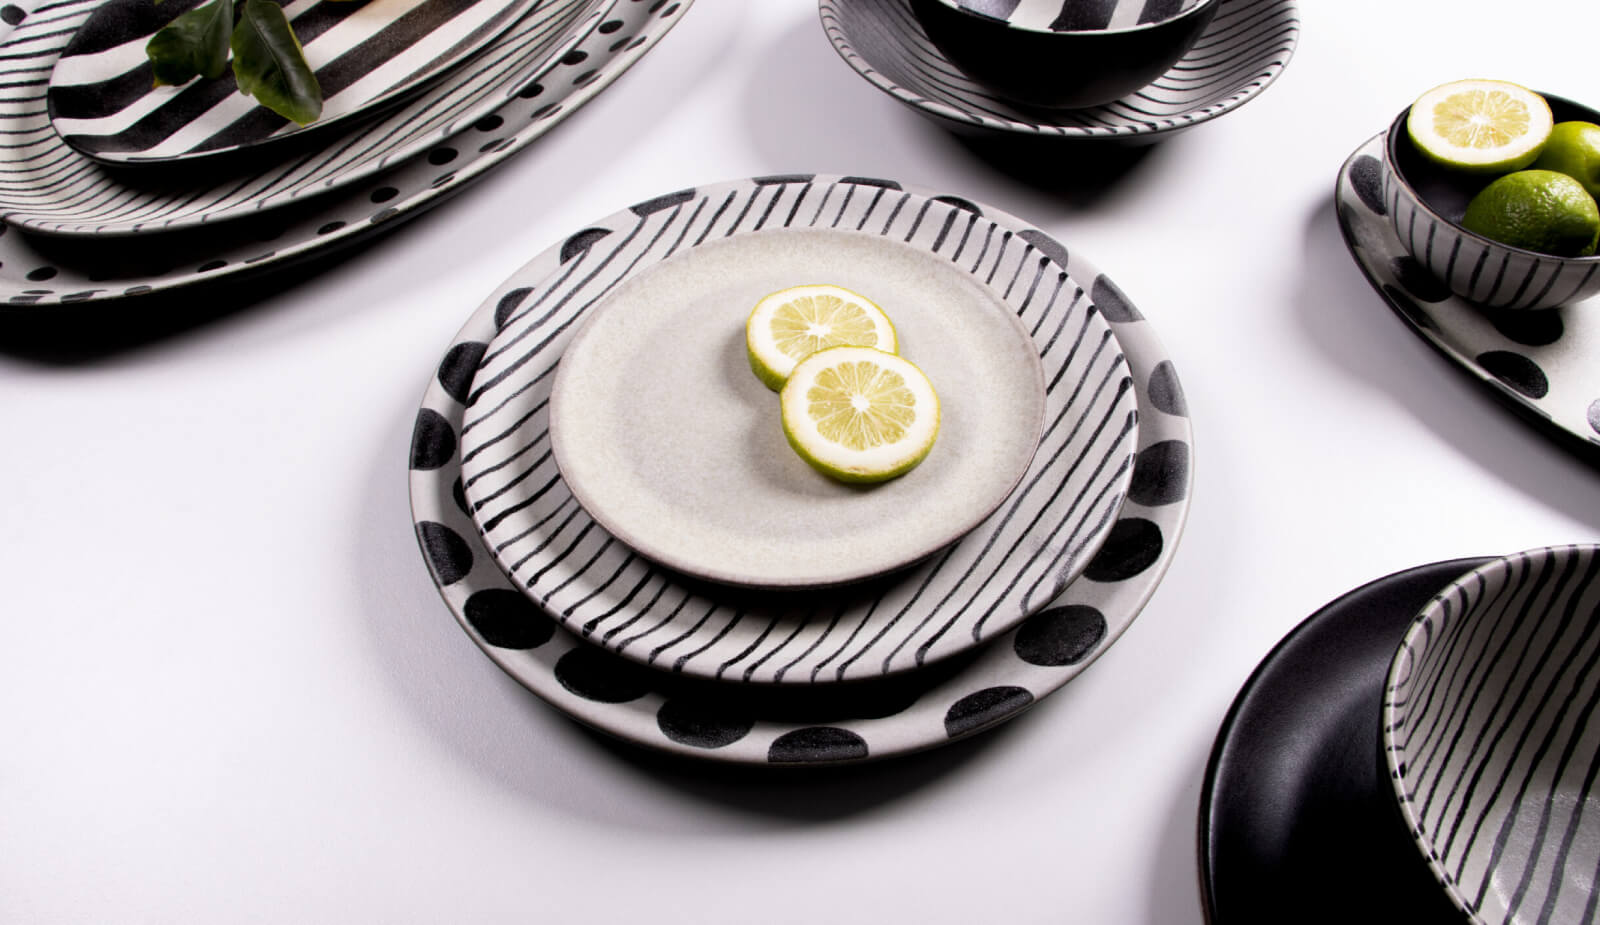 AAW Furniture Dinning Ware Collection